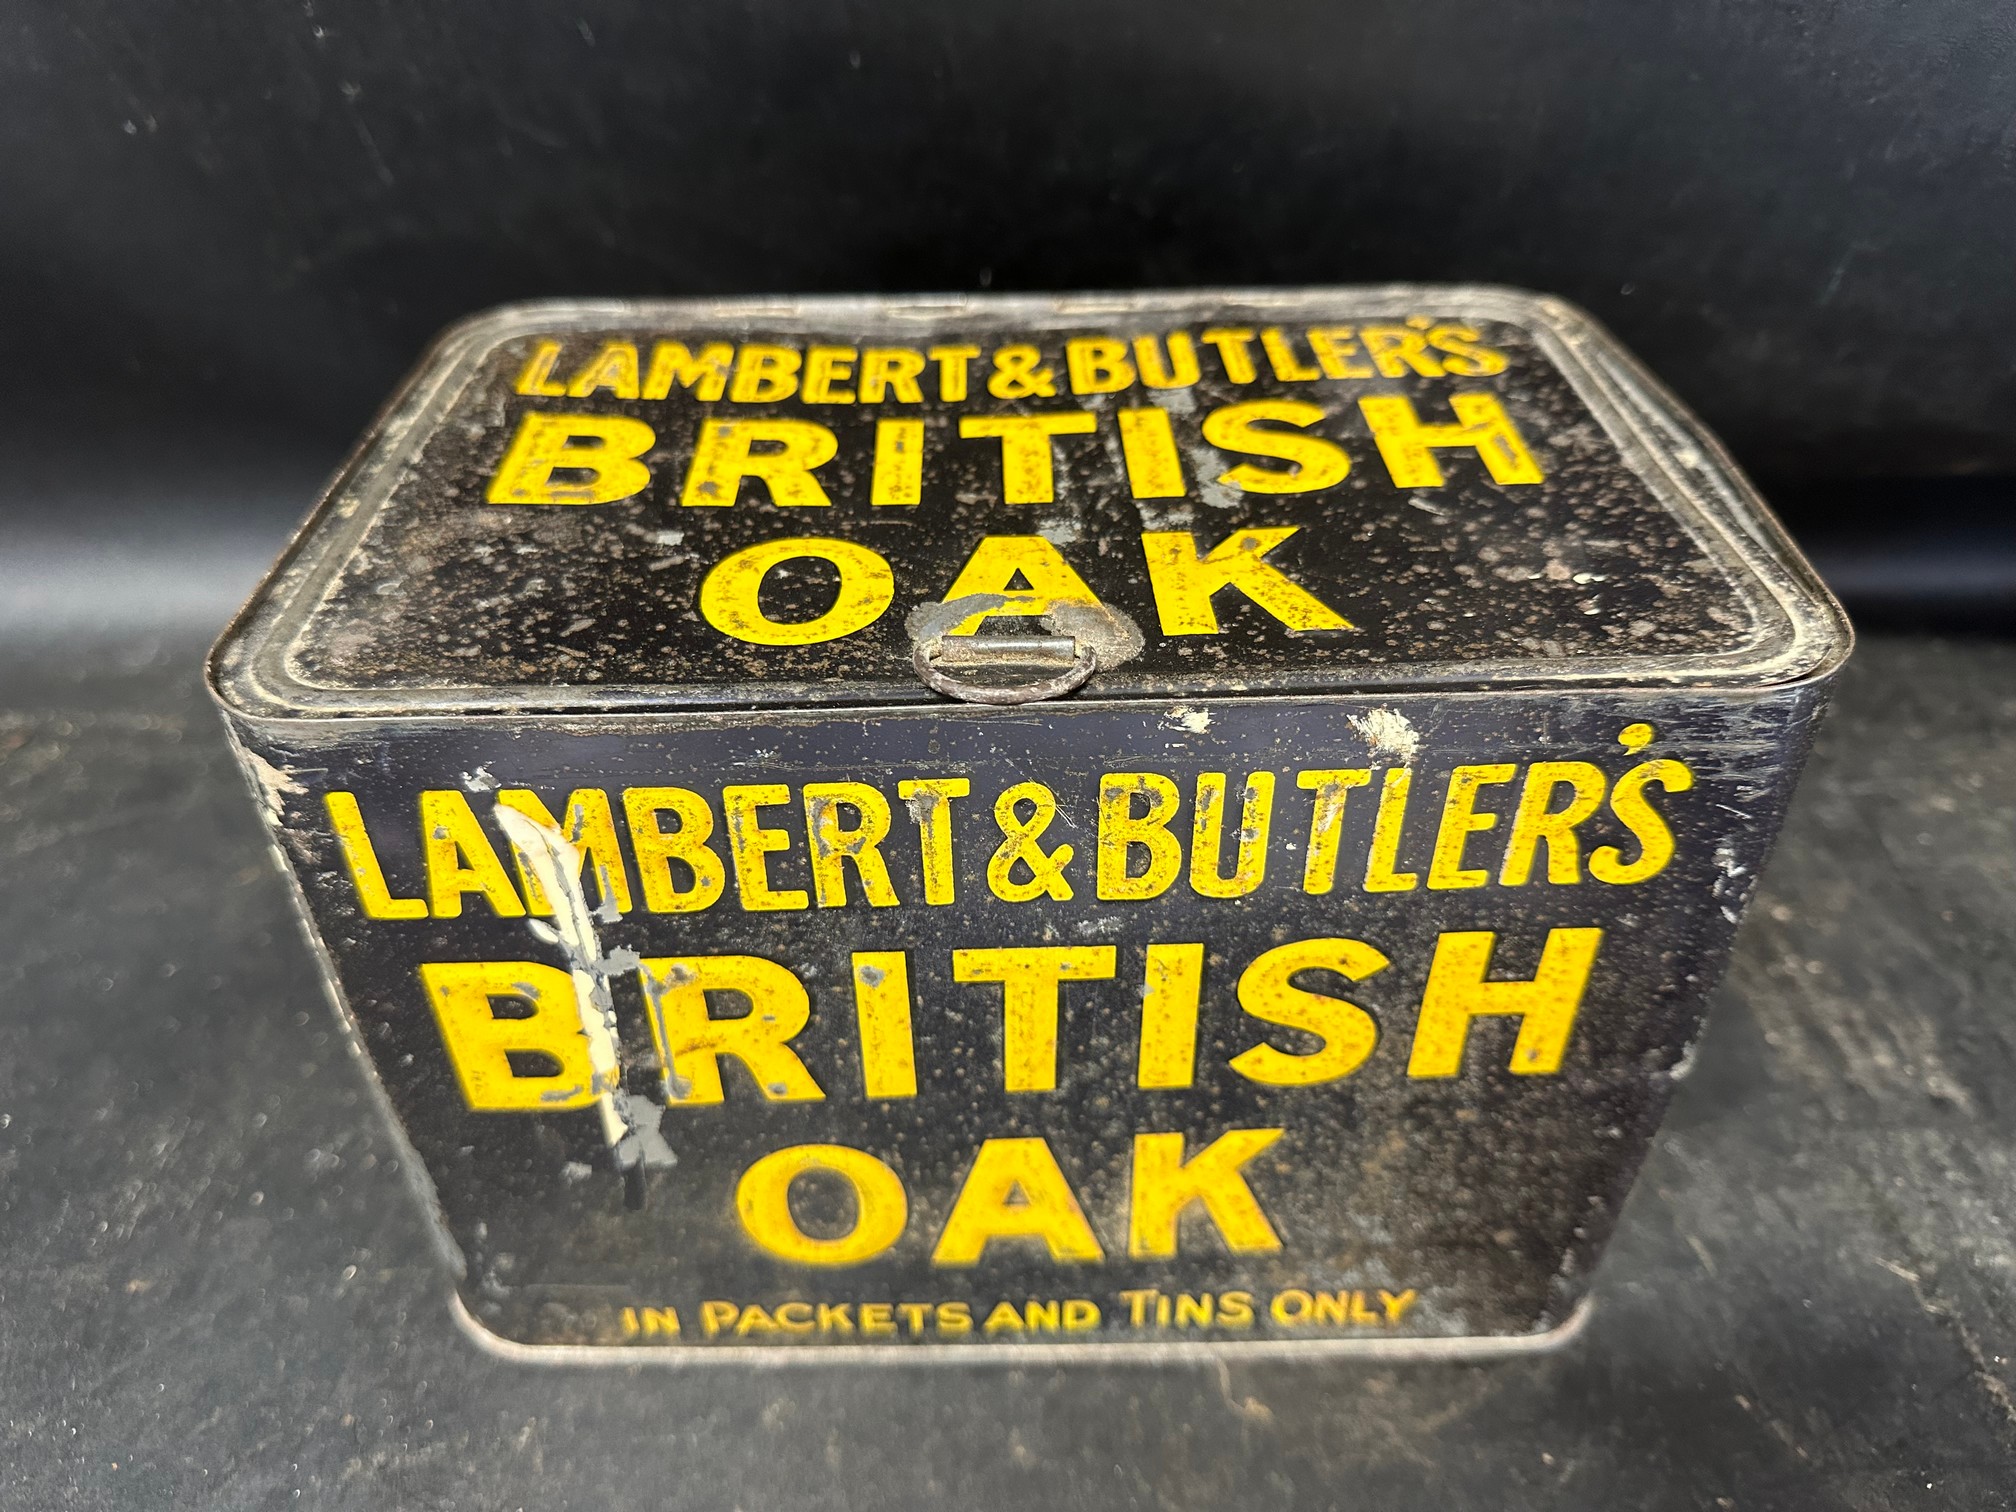 A Lambert & Butler's British Oak in packets and tins only counter box for "British Oak Shag", issued